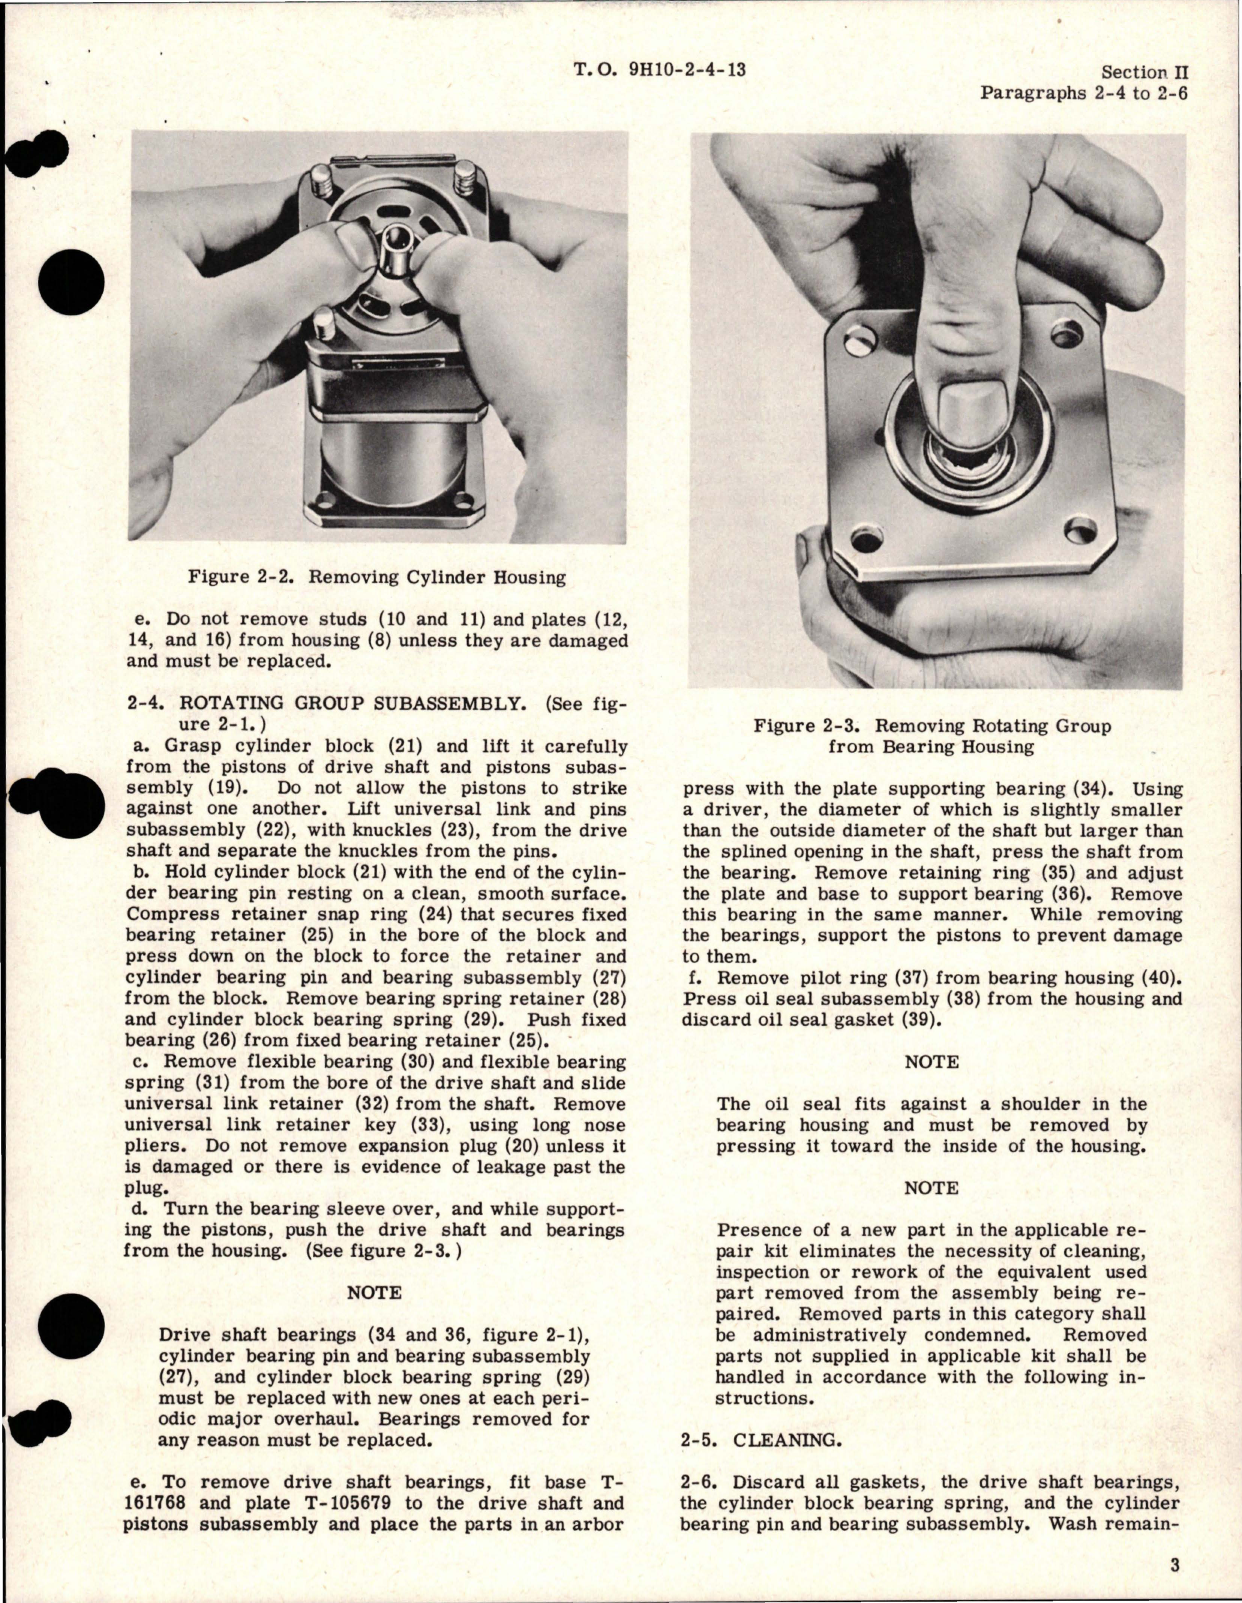 Sample page 7 from AirCorps Library document: Overhaul Instructions for Hydraulic Motor Assemblies - MF-713 Series